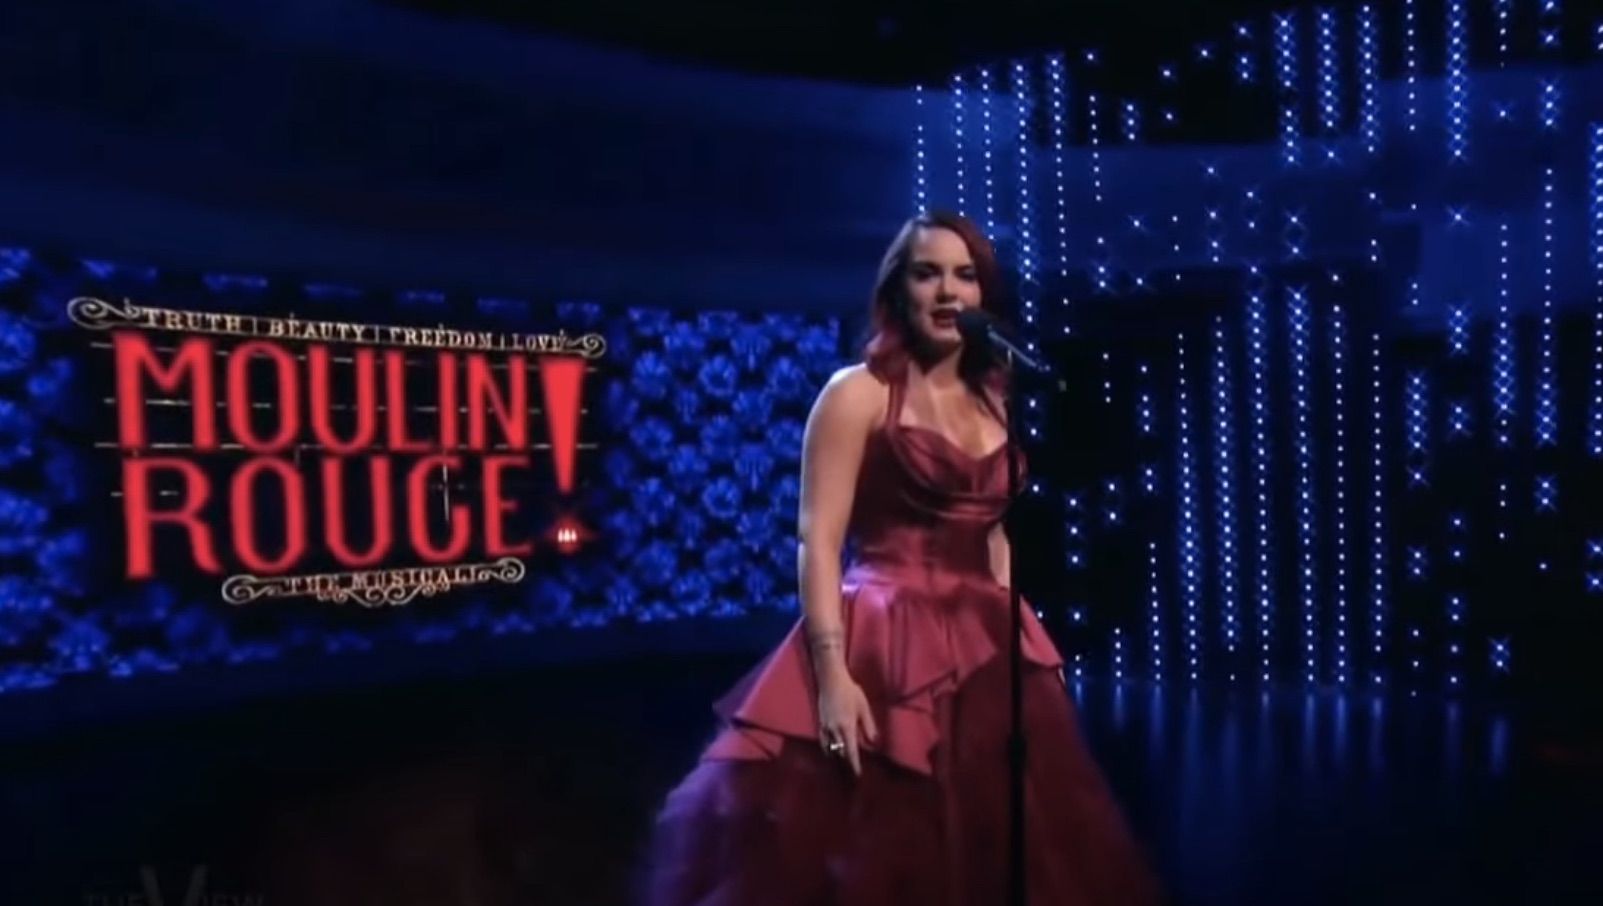 JoJo Marvels with ‘Moulin Rouge’ Version of Katy Perry’s ‘Firework’ on ‘The View’